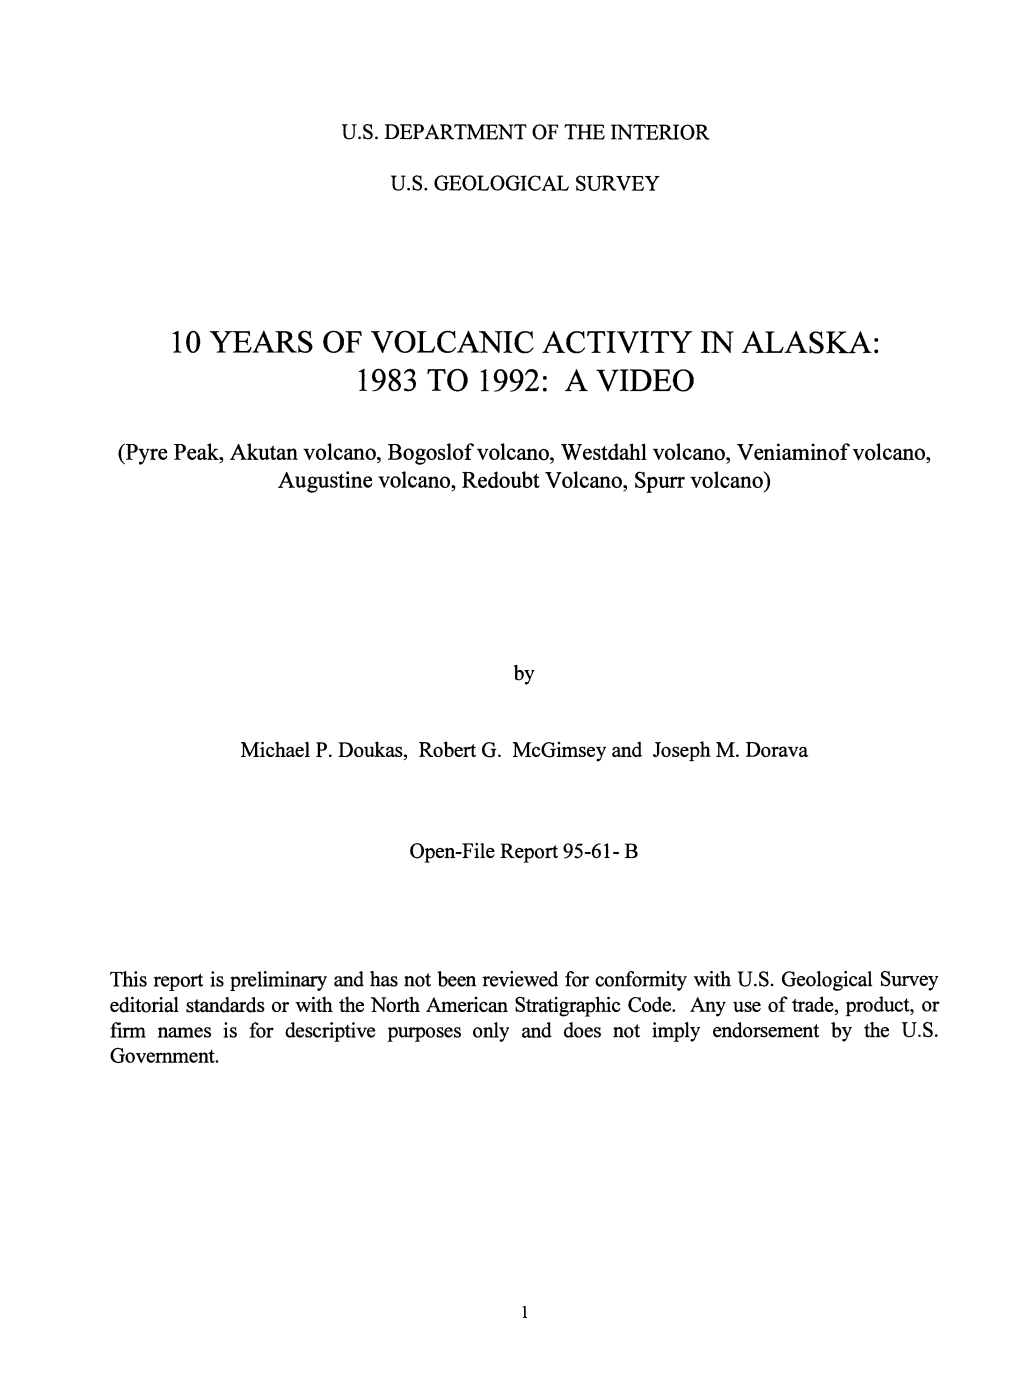 10 Years of Volcanic Activity in Alaska: 1983 to 1992: a Video